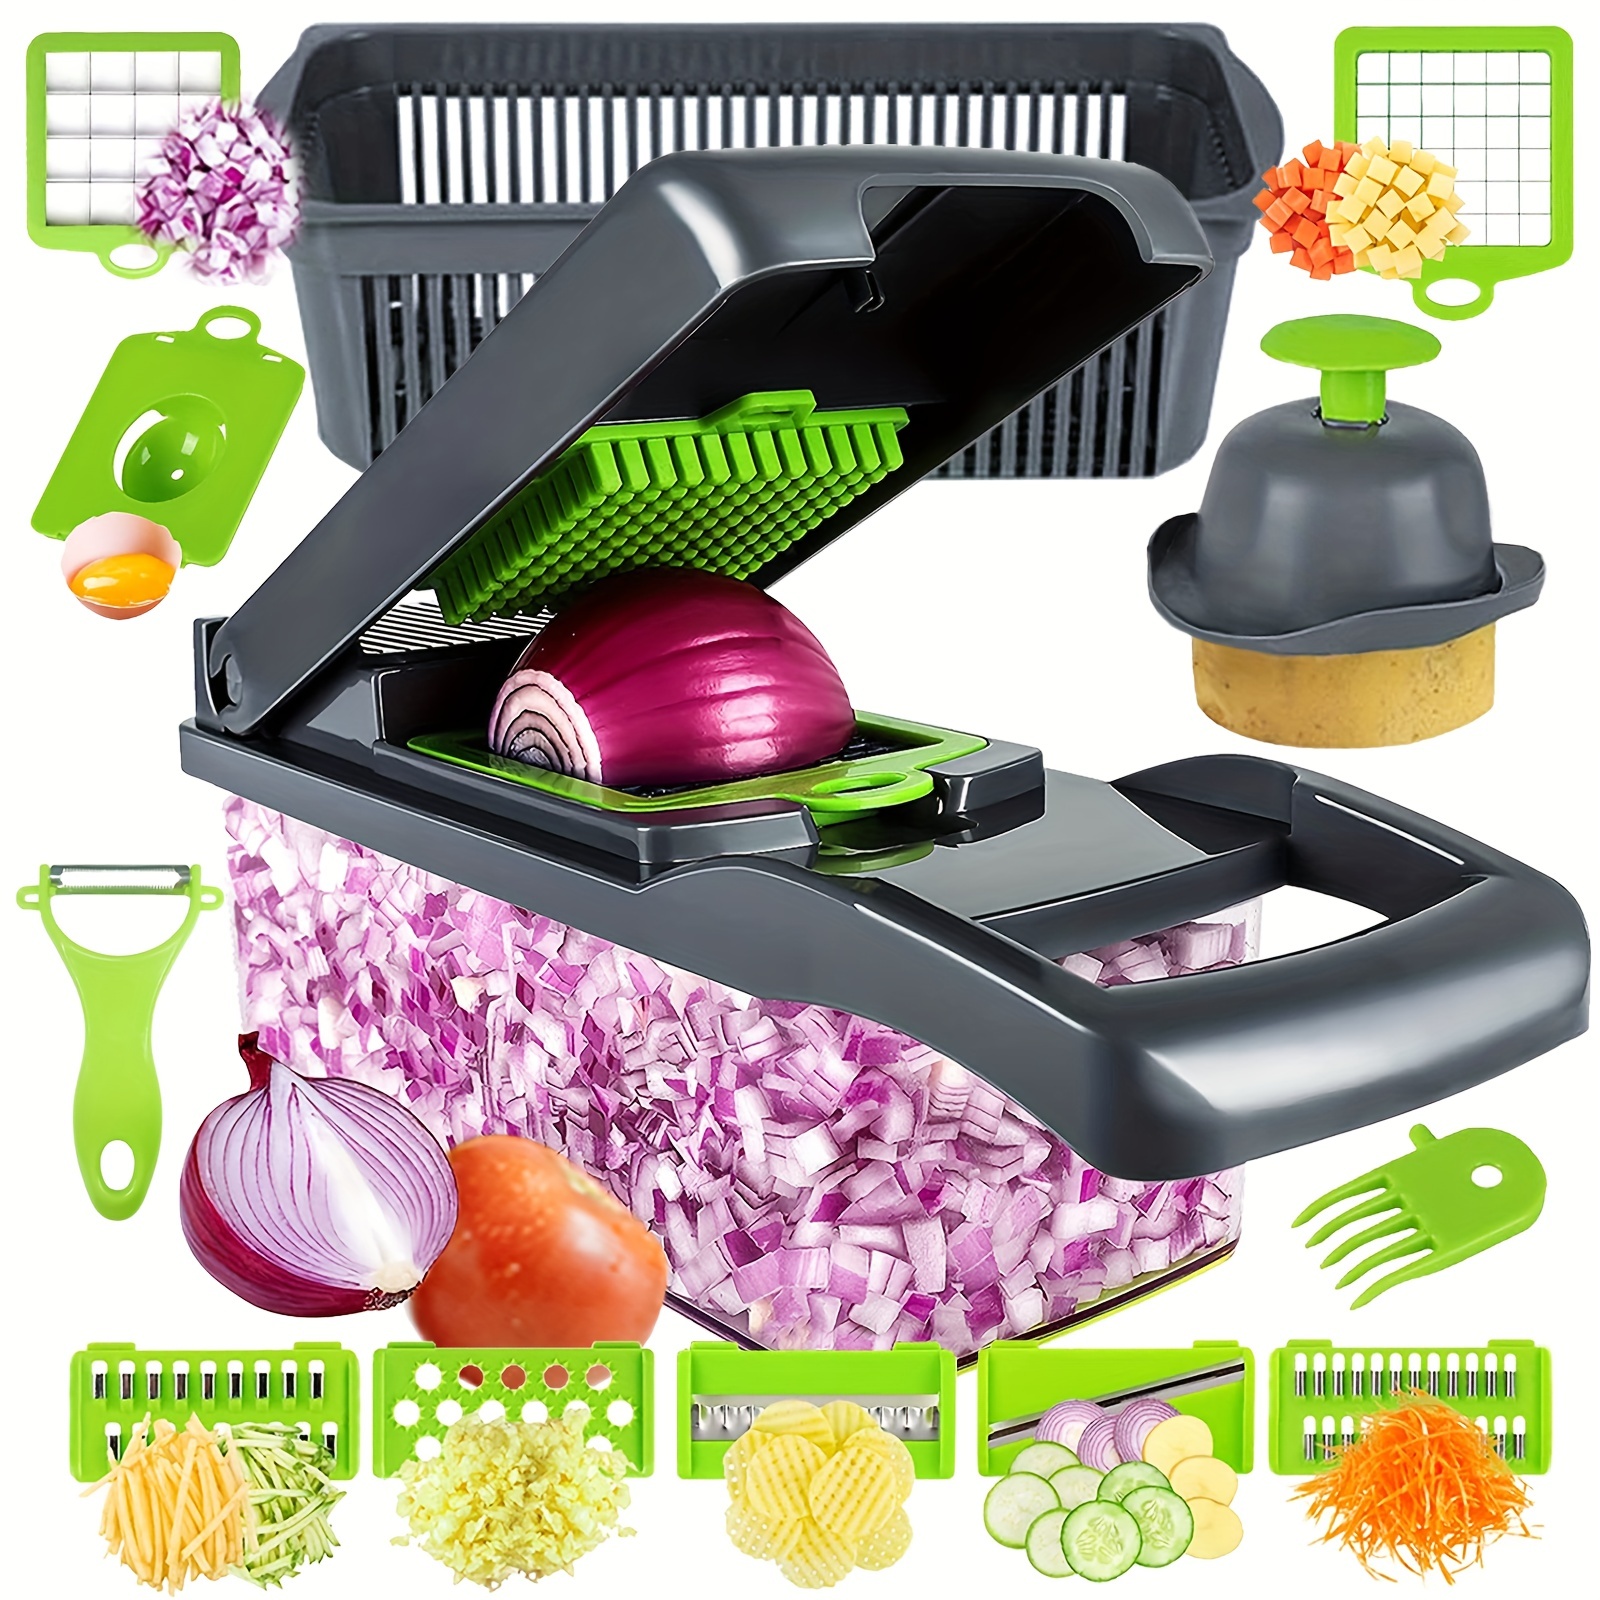 Vegetable Chopper,Multifunctional 12-in-1 Food Choppers Onion Chopper  Vegetable Slicer Cutter Dicer Veggie chopper with 8 Blades,Colander  Basket,Container for Salad Potato Carrot Garlic 